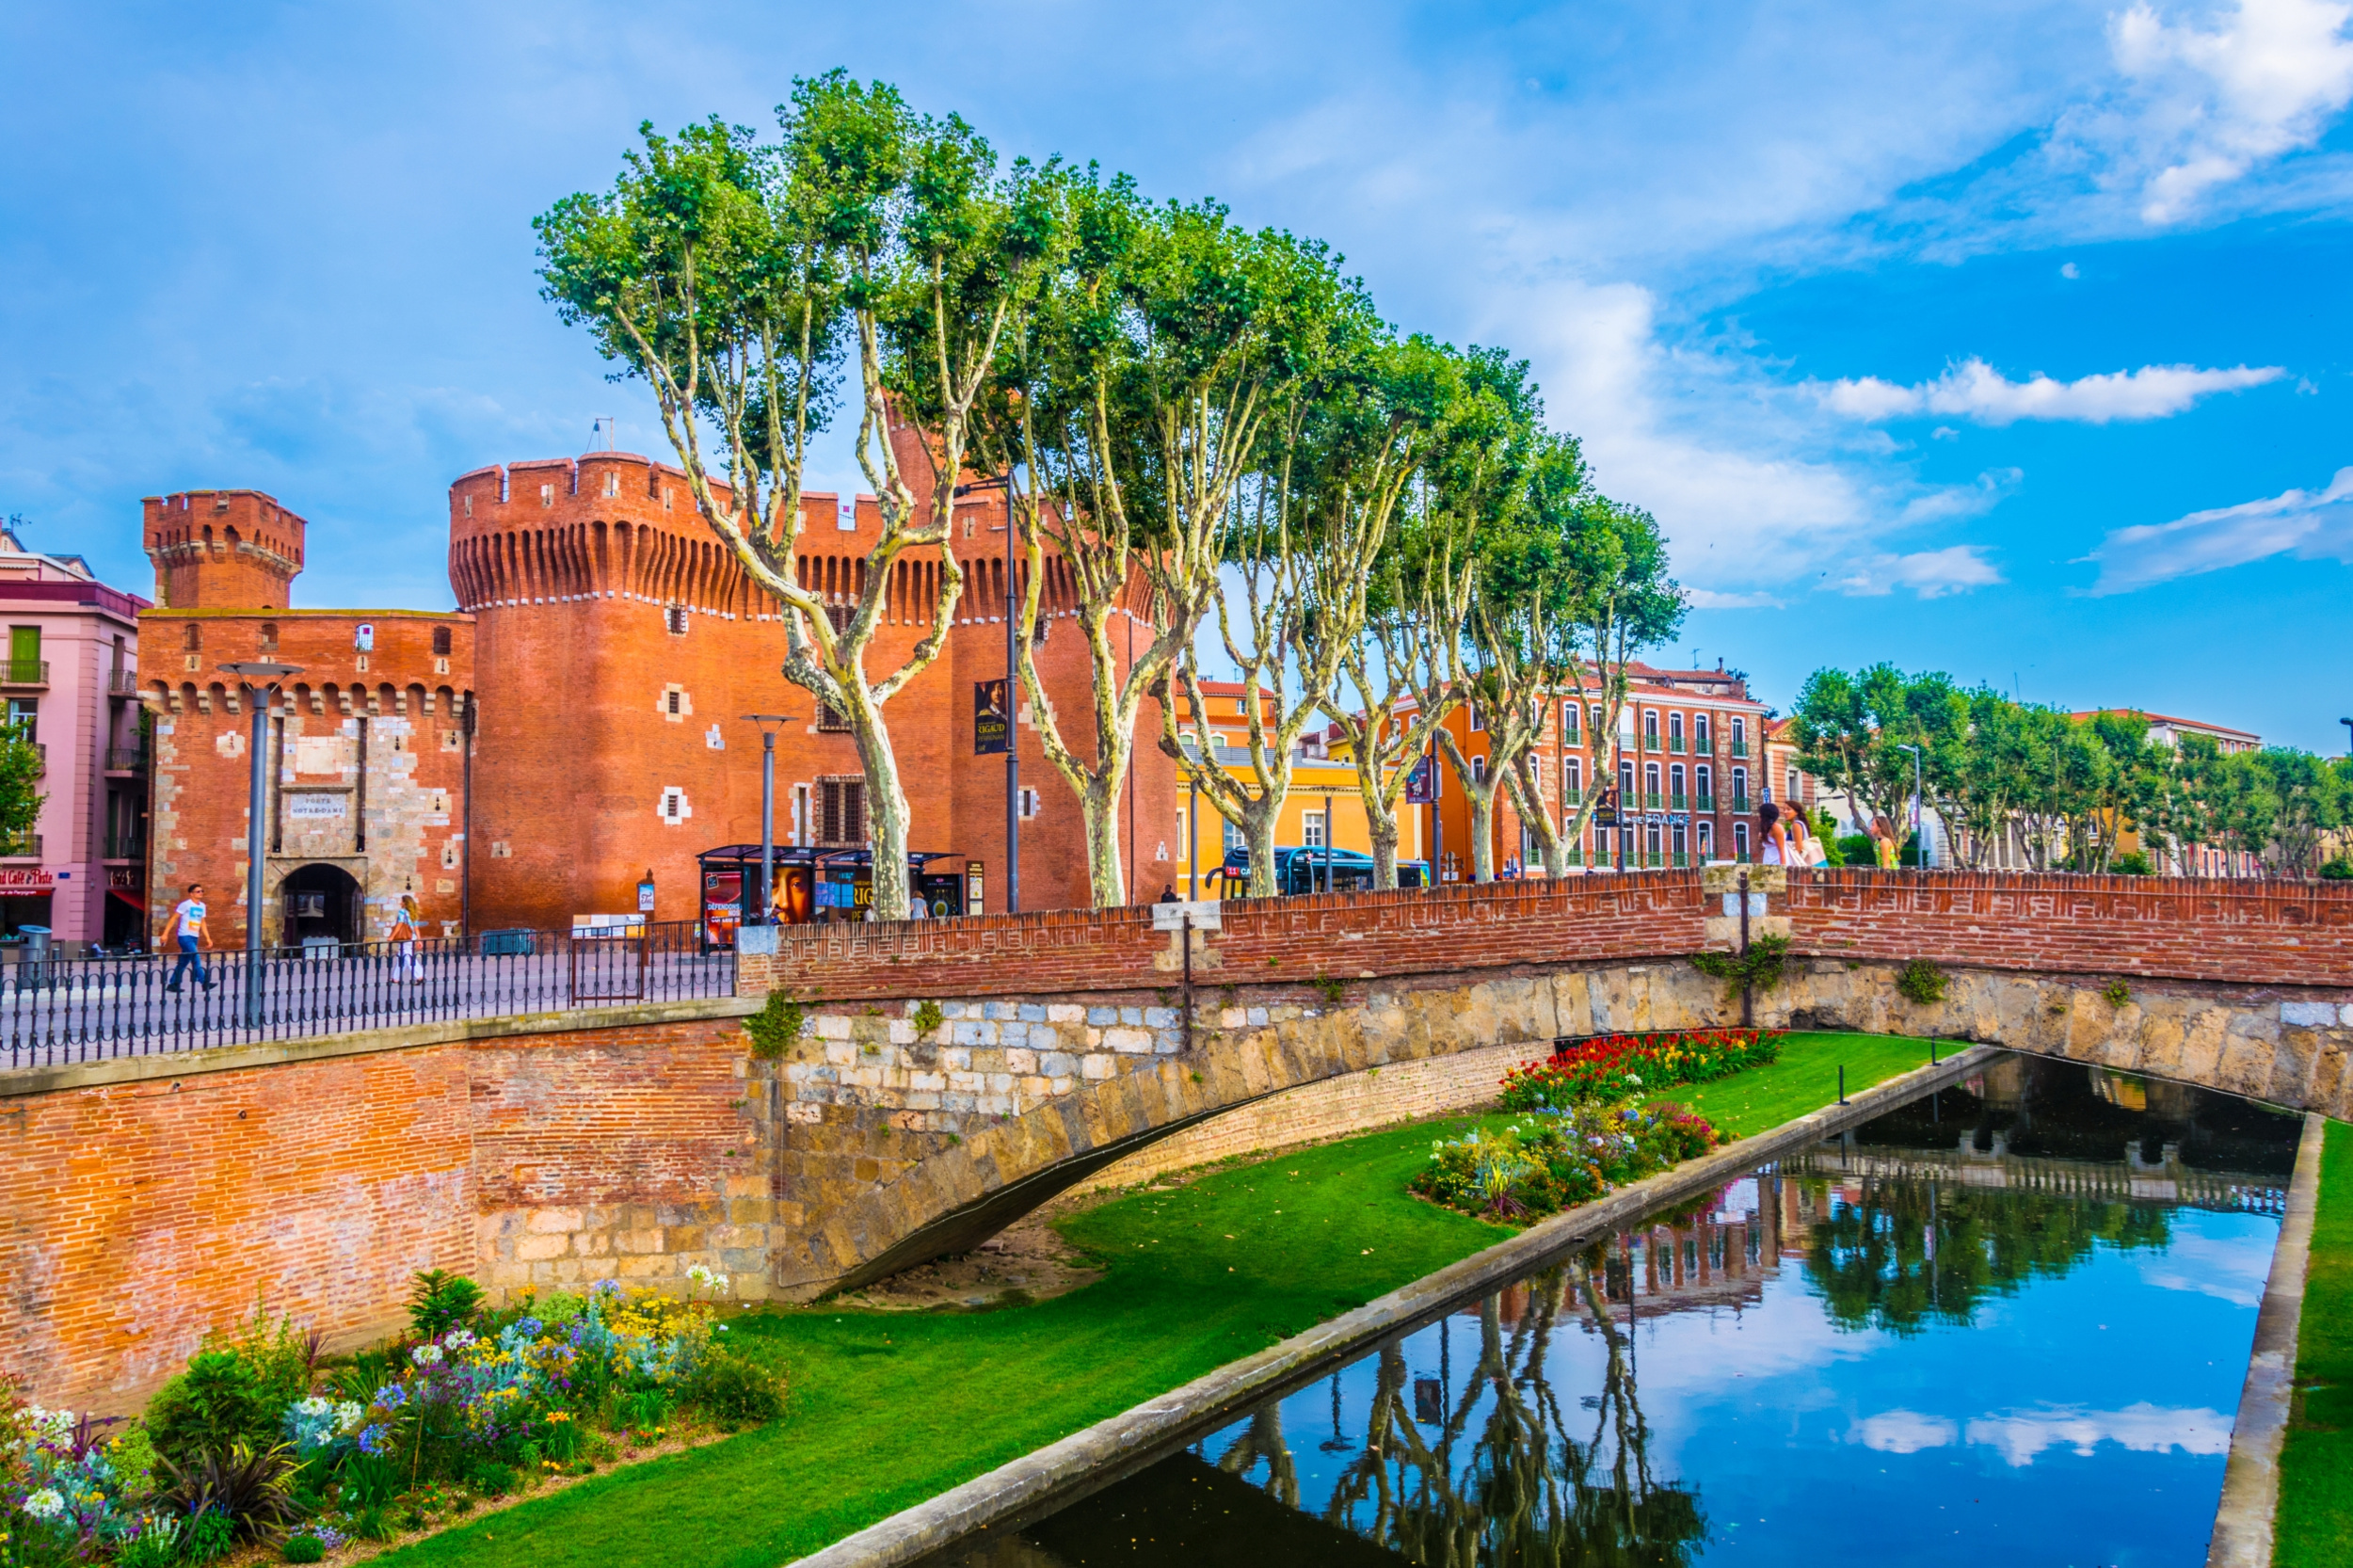 <p>Like much of southwestern France, Perpignan is influenced by Spain. The Gothic and Romanesque architecture and food are reminiscent of the neighboring country.</p><p><a href='https://www.msn.com/en-us/community/channel/vid-cj9pqbr0vn9in2b6ddcd8sfgpfq6x6utp44fssrv6mc2gtybw0us'>Follow us on MSN to see more of our exclusive lifestyle content.</a></p>